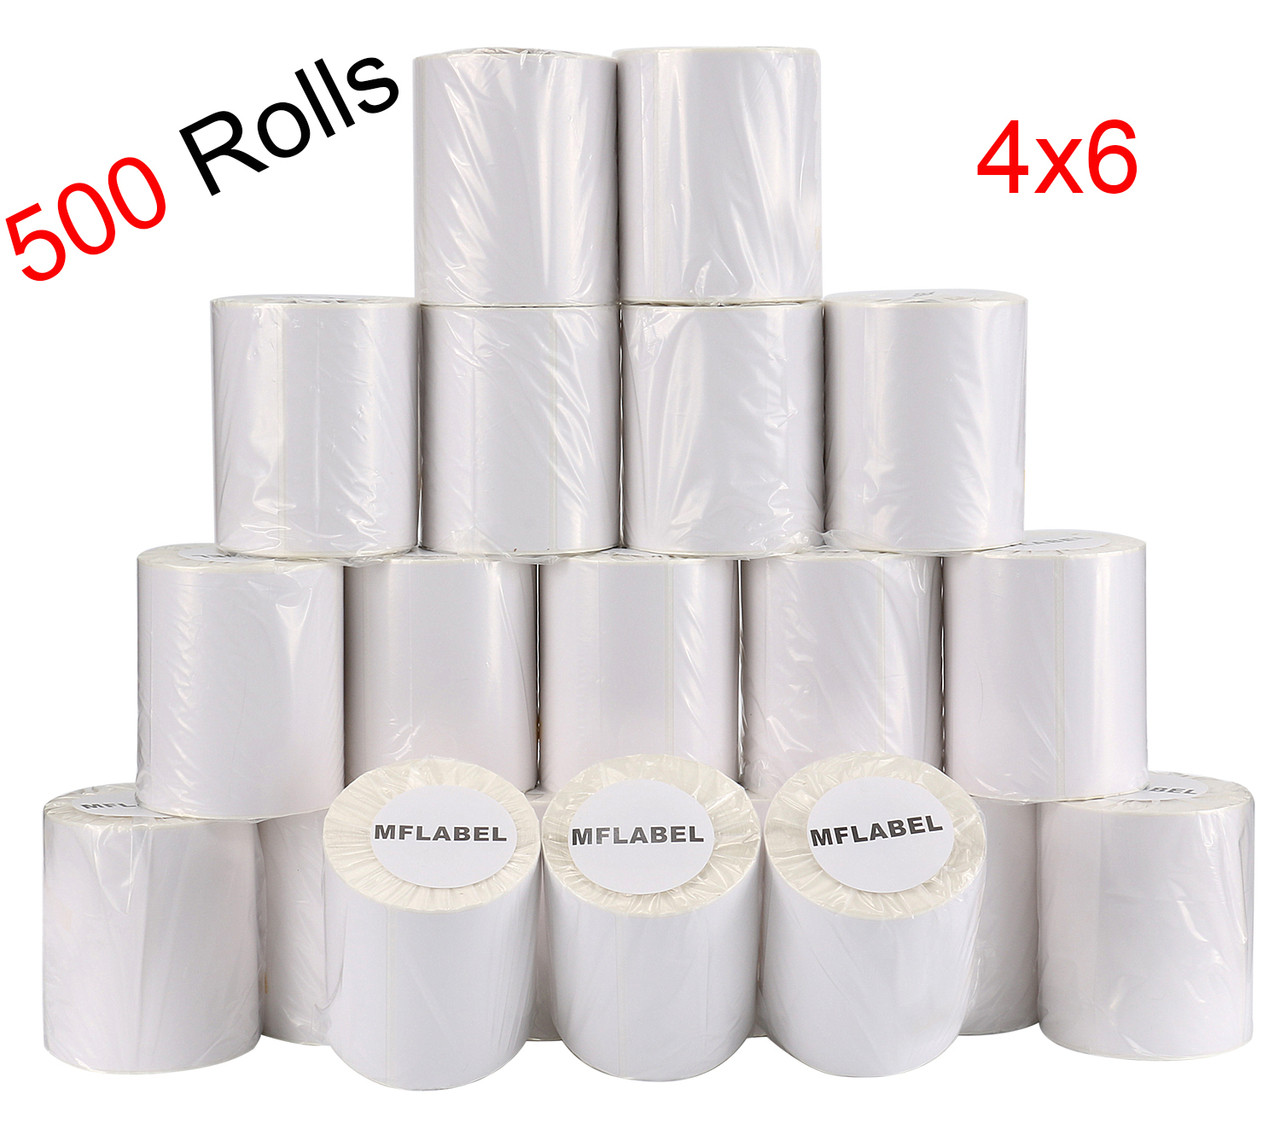 11 Rolls Zebra 2844 ZP450 Eltron 4x6 Direct Thermal Shipping Labels 250/roll 